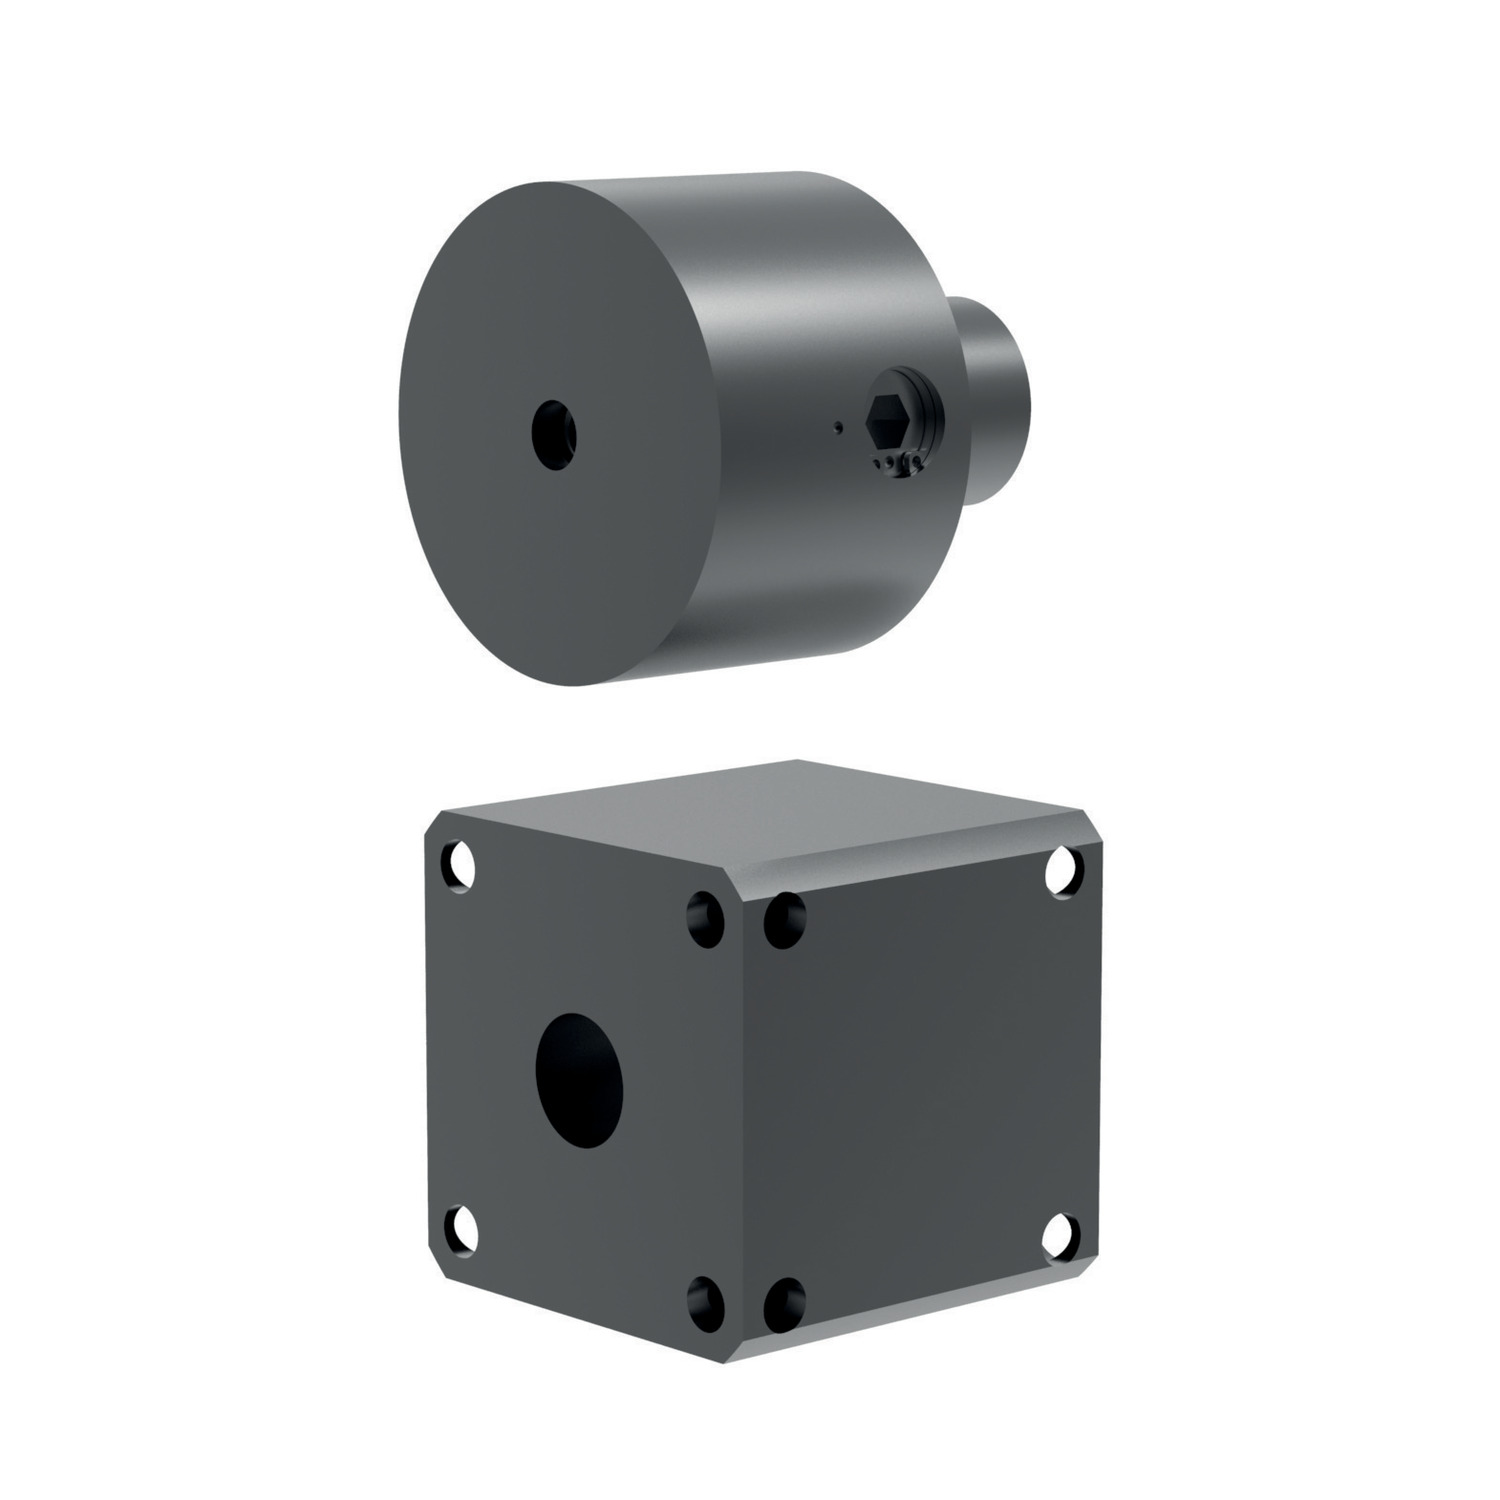 Manual Actuators Manual actuators for mills and lathes. Specifically designed to clamp on blind holes smaller than our Side-Loc clamps would allow. Used in conjunction with our ID Xpansion 